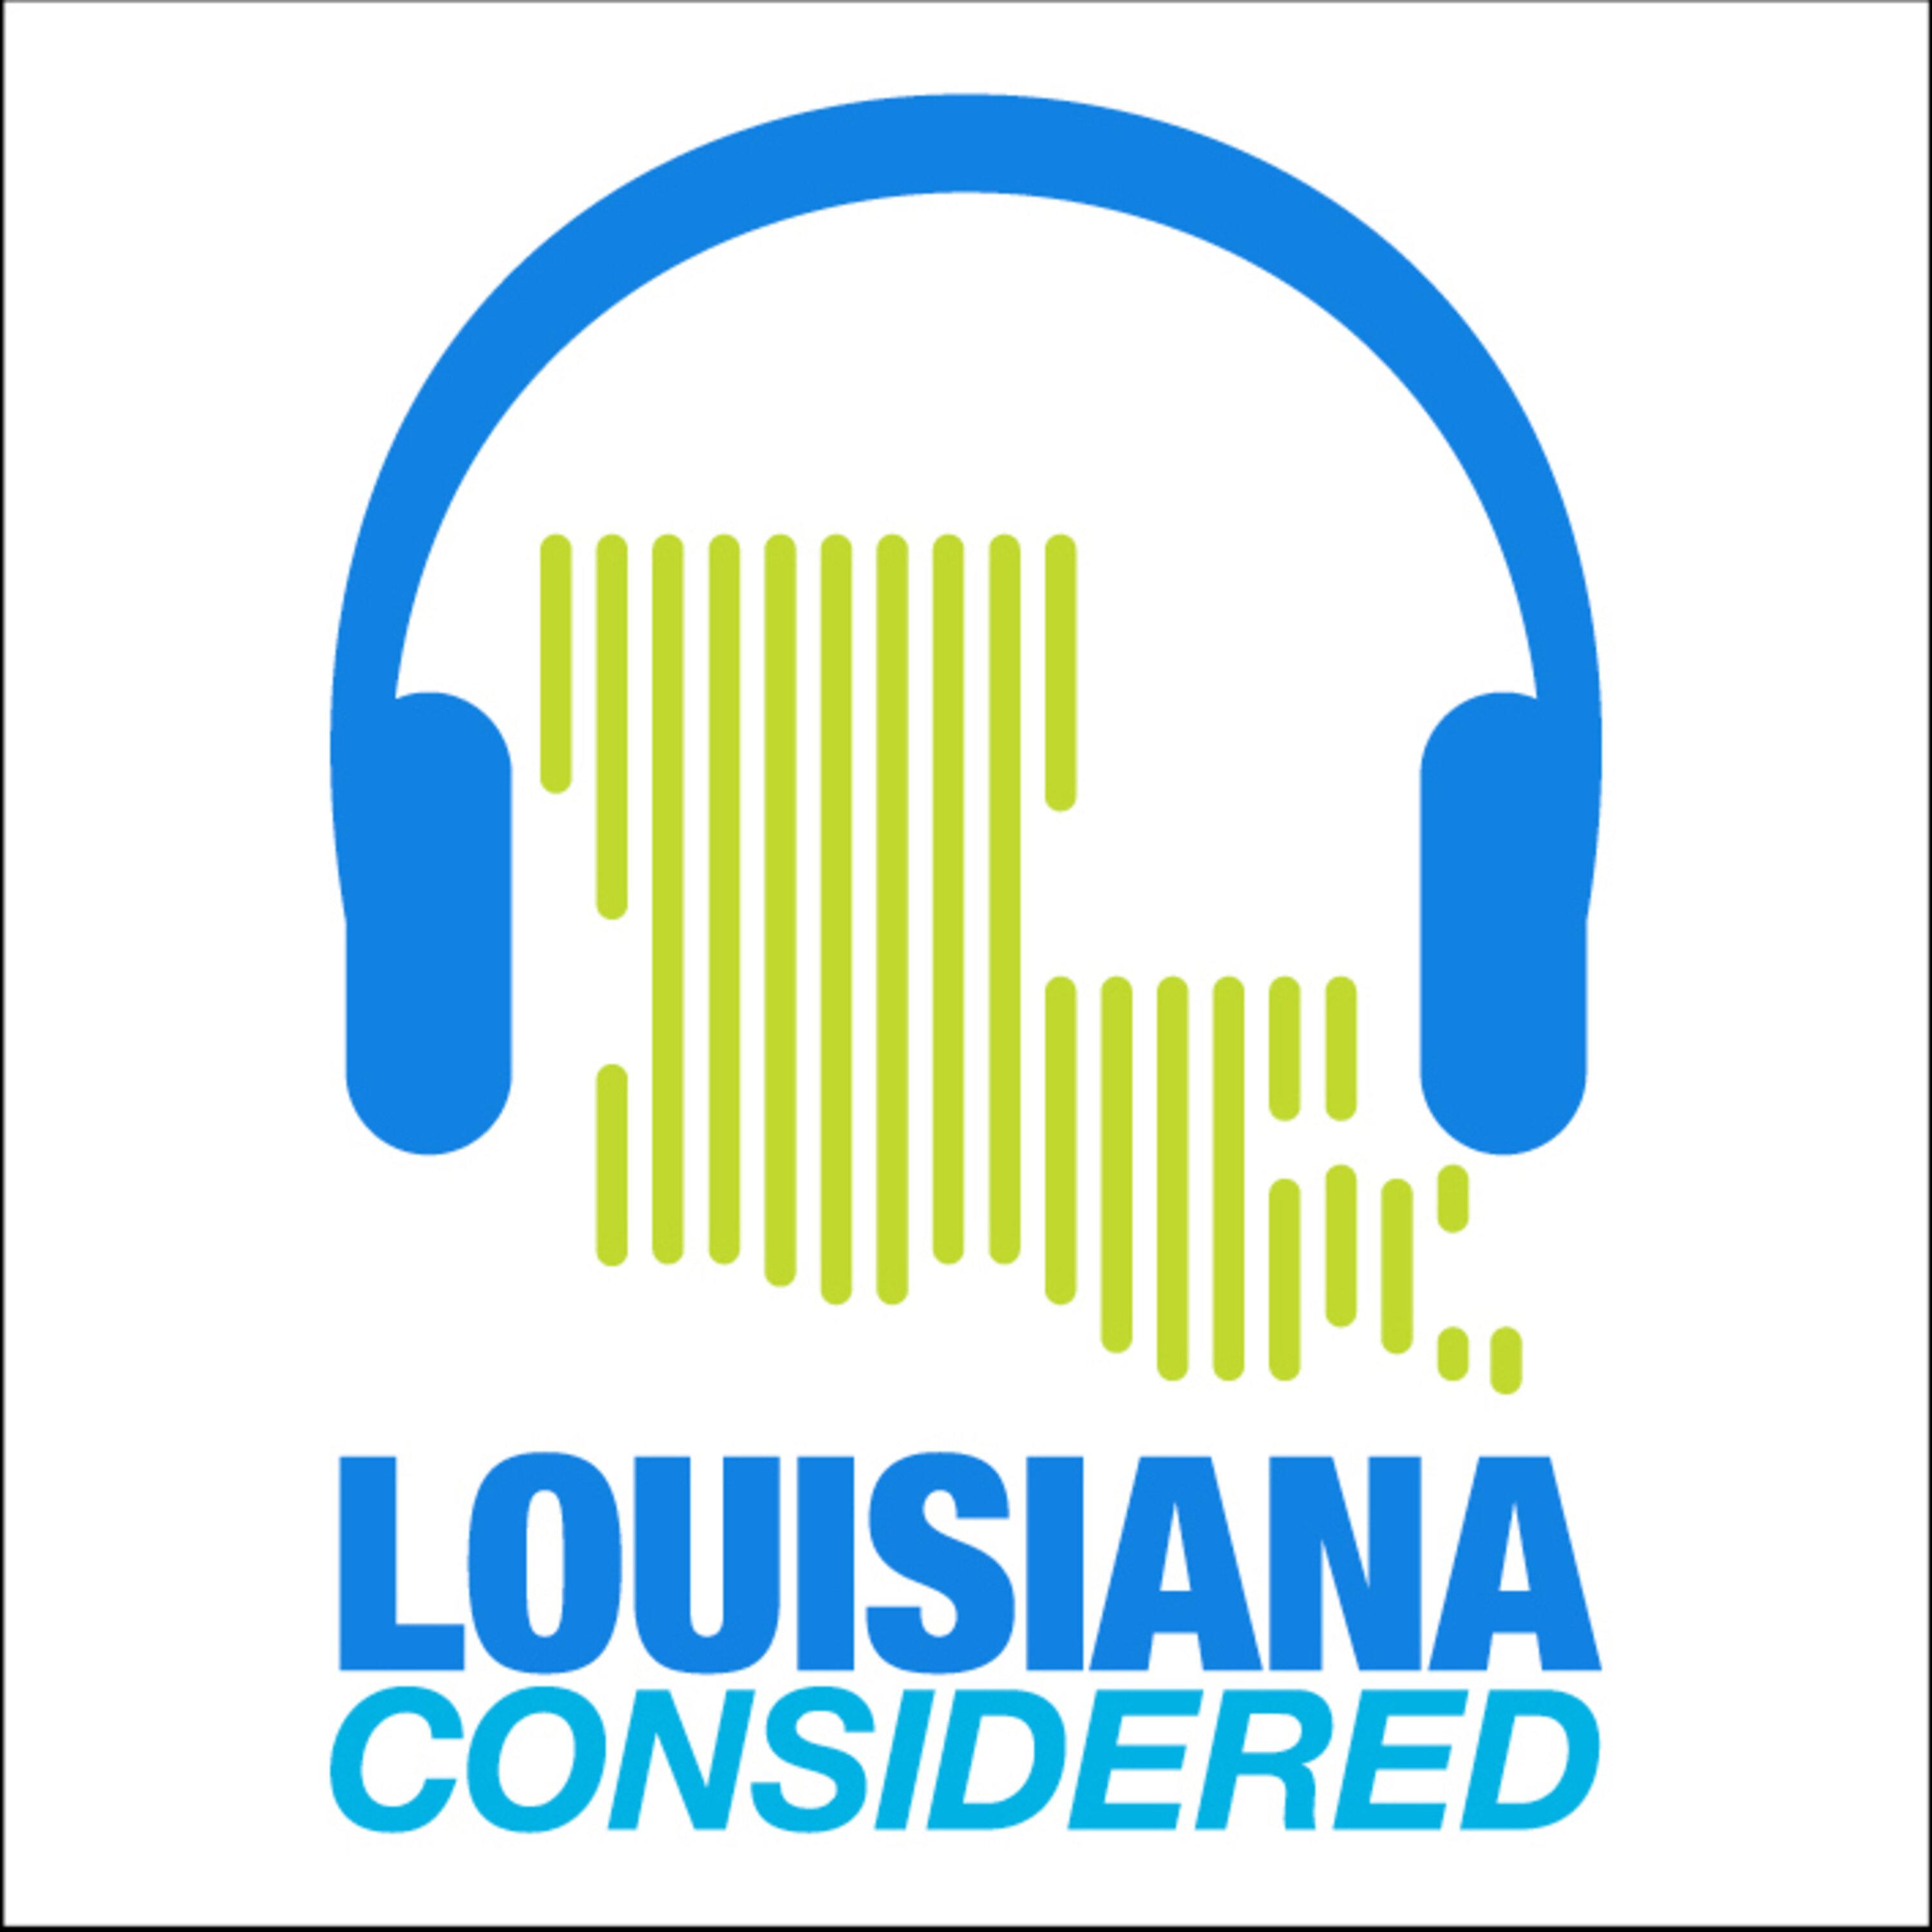 Thumbnail for "Louisiana Considered: A documentary looks at Jim Crow-era laws and how it impacted convictions".